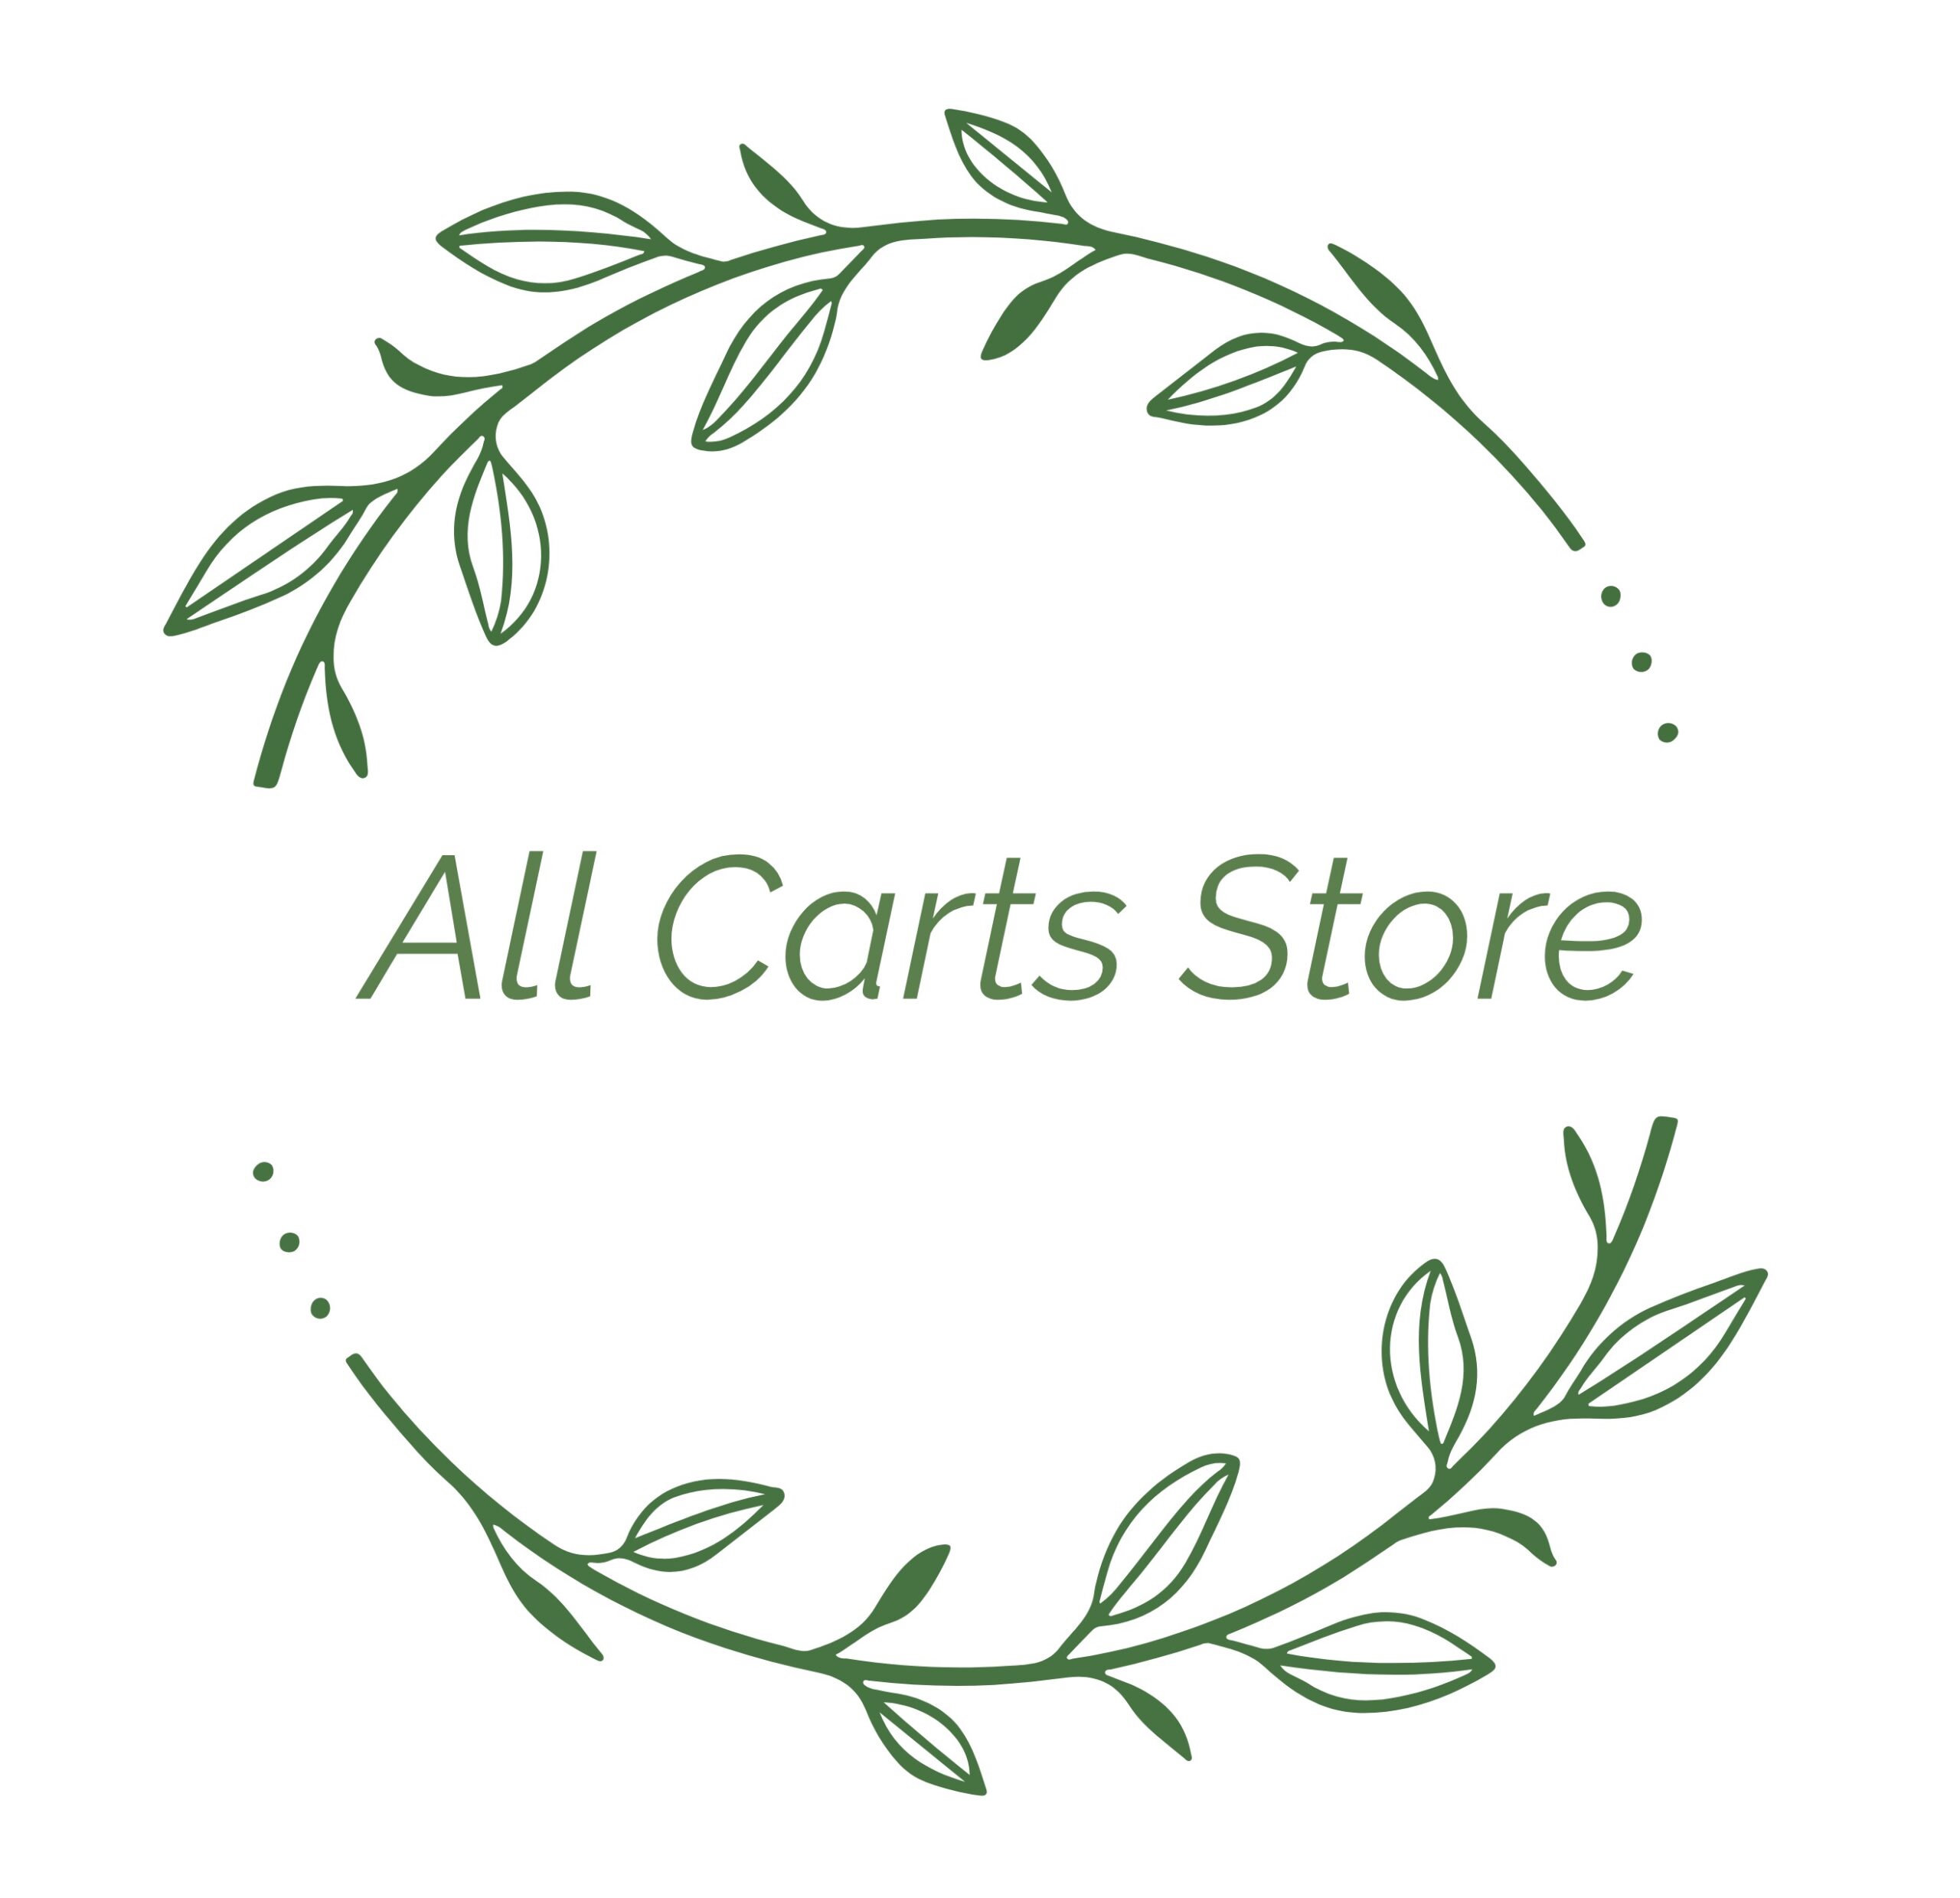 All Carts Store